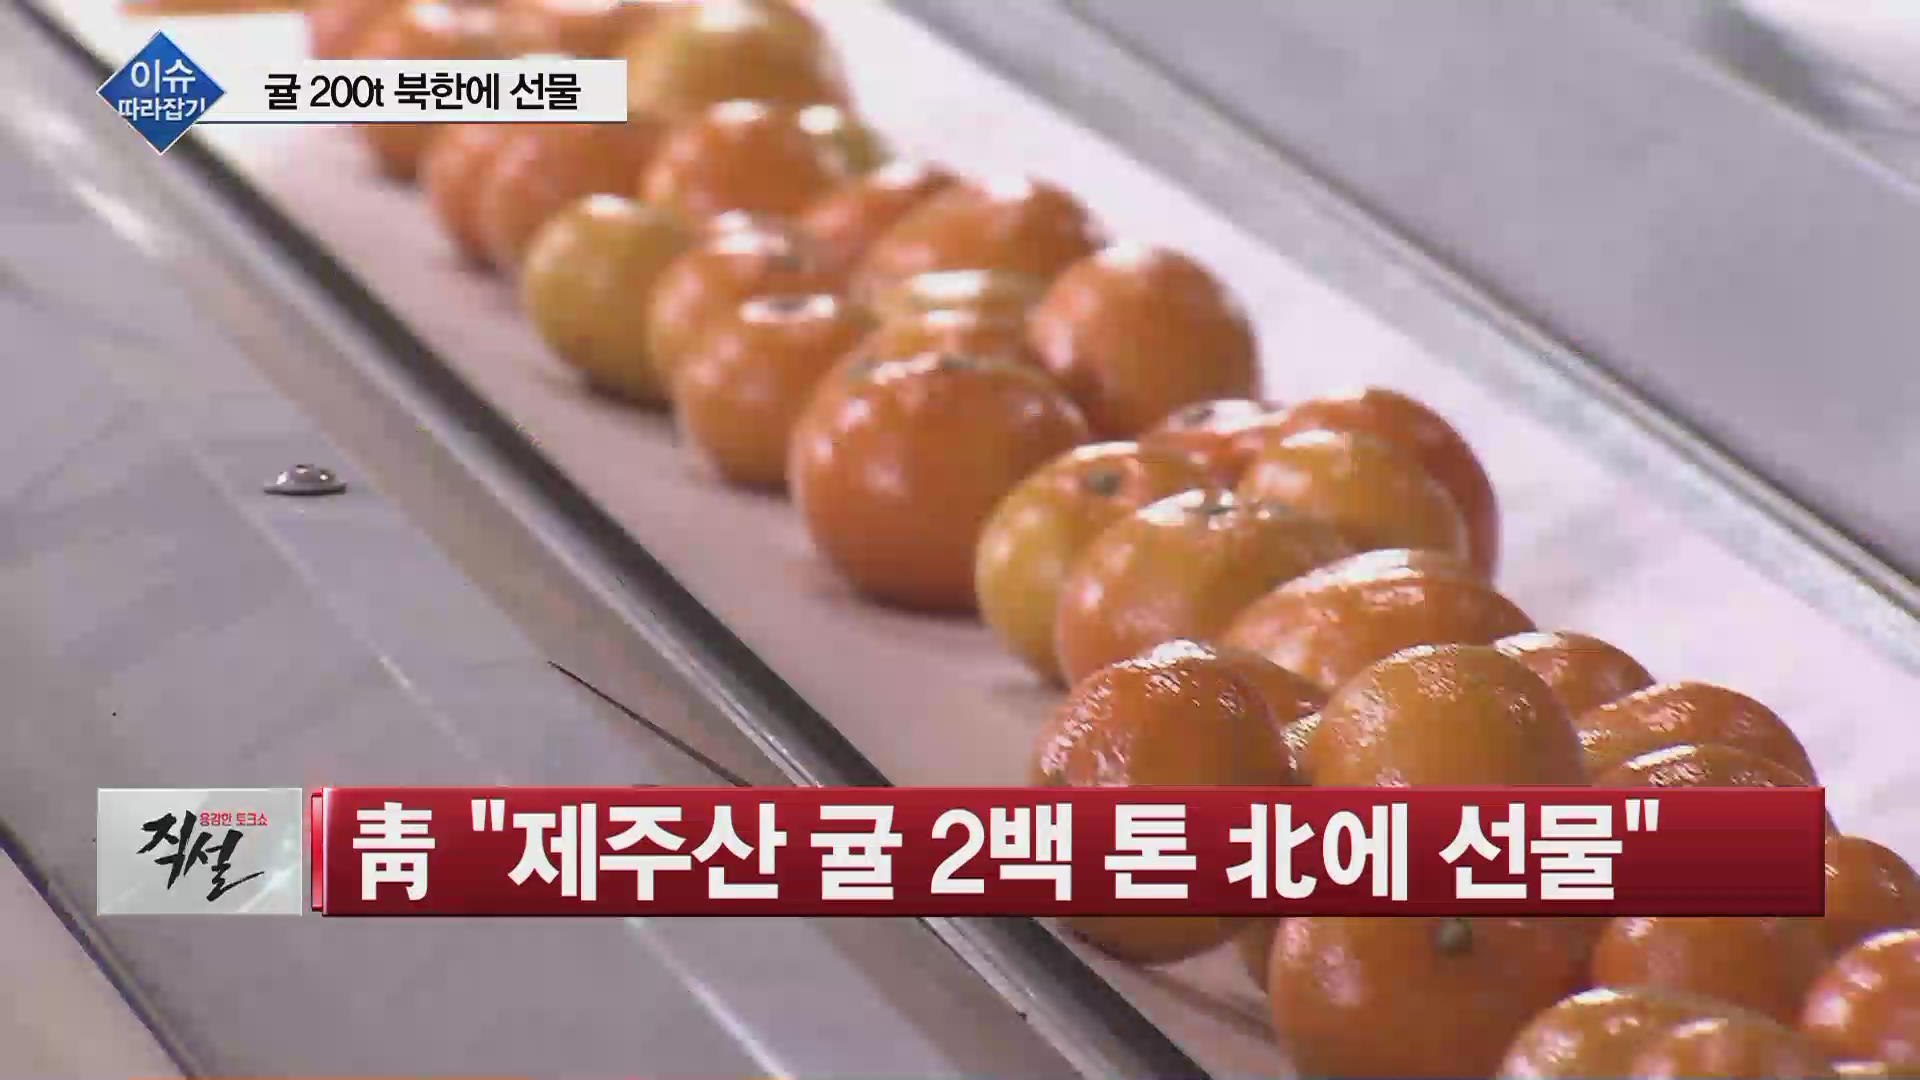 Brave talk show straight ahead- Proceeding: Won Il-hee - Appearance: Professor Choi Jin-bong of Sungkonghoe UniversityQ. Yesterday (11th) the government sent 200 tons of Tangerine from Jeju Island to North Korea.I explained that it was meant to return the pine mushrooms sent from the North during the last inter-Korean summit. How do you see that?Q. North Korea residents hope to taste it, but in fact, no one knows how much of the 200 tonnes of Tangerine will go to North Korea residents.Some are worried that they might be breaking sanctions against North Korea. Did Jin Migyeong make a critical statement?Q. The controversy over the cancellation of BTS Japan is growing. We are also focusing on overseas.The members are t-shirting Ji Mins Liberation Day T-shirt, but it was in 2017 and even distorted the meaning of T-shirts.Q. BTS is popular all over the world. Its heavily covered by foreign media. Rather, history is known and Japans war crimes are being illuminated?Q. The vacancy of the committee member is said to be appointed within the party.There is criticism that the road of the Jing Migieong Human print your has become even further away in the battle of rolling stones. How do you see it?Q. Yoon Chang-ho, who was hit by a drunken vehicle on September 25, was eventually killed. There was a funeral yesterday.The so-called Yoon Chang-ho law, an amendment to the application of murder, has been initiated in case of a drunk driving death accident, but Lee Yong-ju, who initiated the law together, was also caught for drunk driving.Yoon Chang-hos family and friends went awry, but this amendment only asked for passage to the National Assembly. What will happen?(For more information, please watch the video.